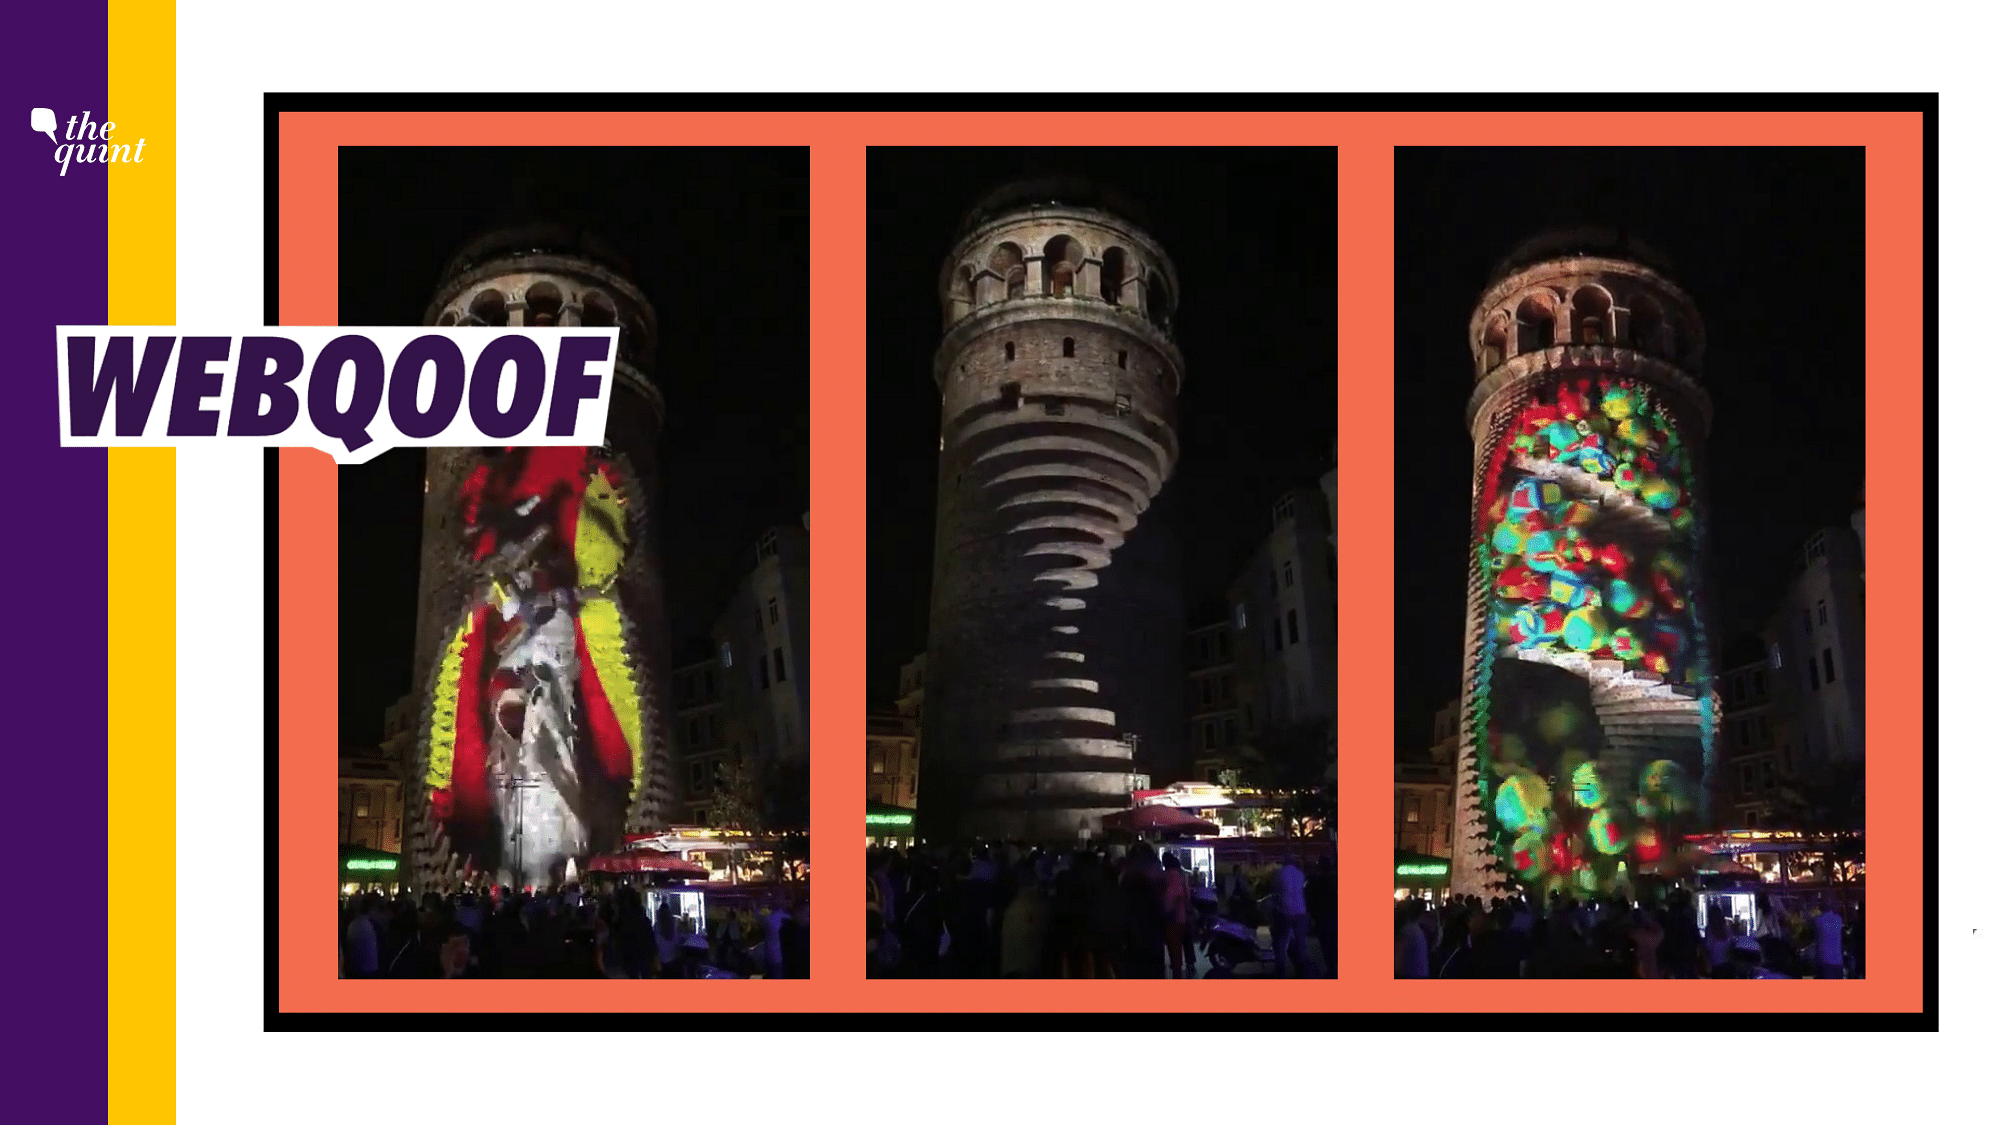 The Cream Studio had created a 3D projection mapping experience for Istanbul’s Galata Tower.